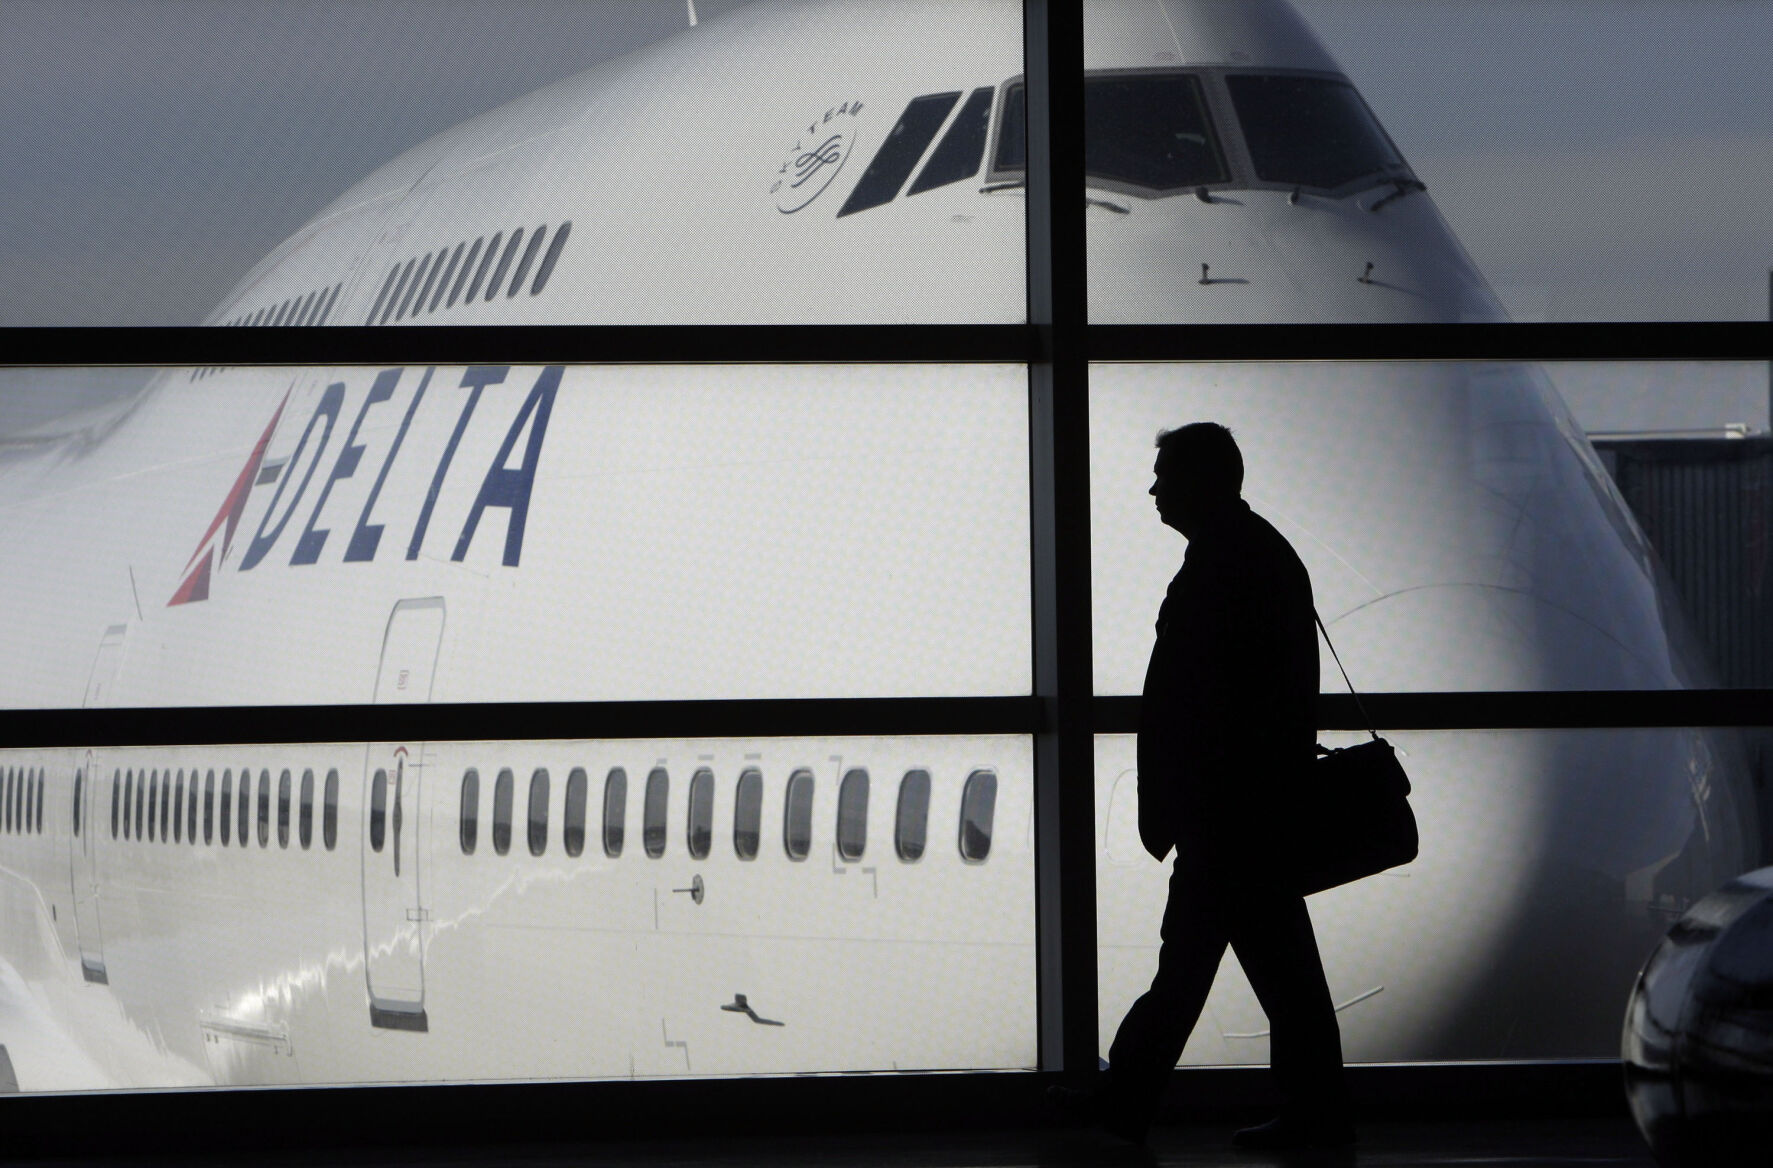 <p>FILE - In this file photo made Jan. 21, 2010, a passenger walks past a Delta Airlines 747 aircraft in McNamara Terminal at Detroit Metropolitan Wayne County Airport in Romulus, Mich. Major airlines are suspending flights to Israel after it formally declared war following a massive attack by Hamas. American Airlines, United Airlines and Delta Air Lines suspended service as the U.S. State Department issued travel advisories for the region citing potential for terrorism and civil unrest. Delta said its Tel Aviv flights have been canceled into this week. (AP Photo/Paul Sancya, File)</p>   PHOTO CREDIT: Paul Sancya